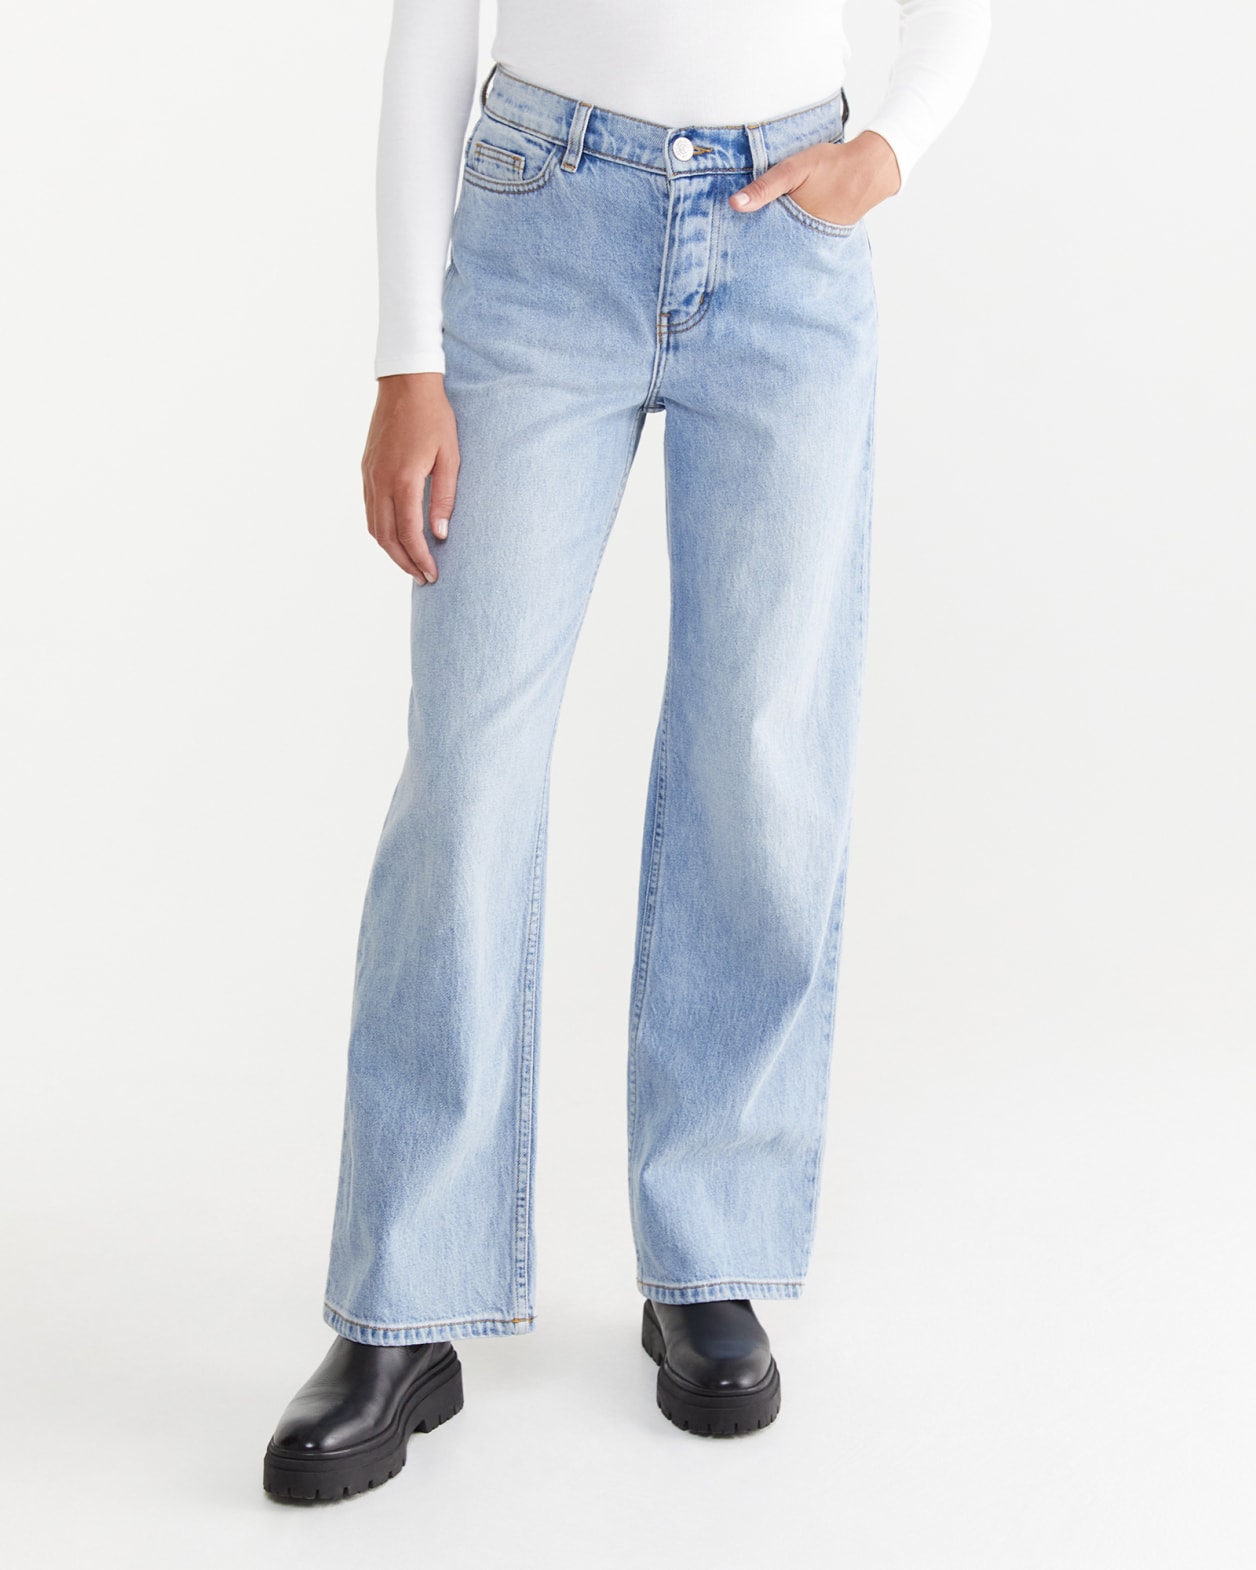 Tyla Mid Rise Relaxed Jeans in VINTAGE WASH